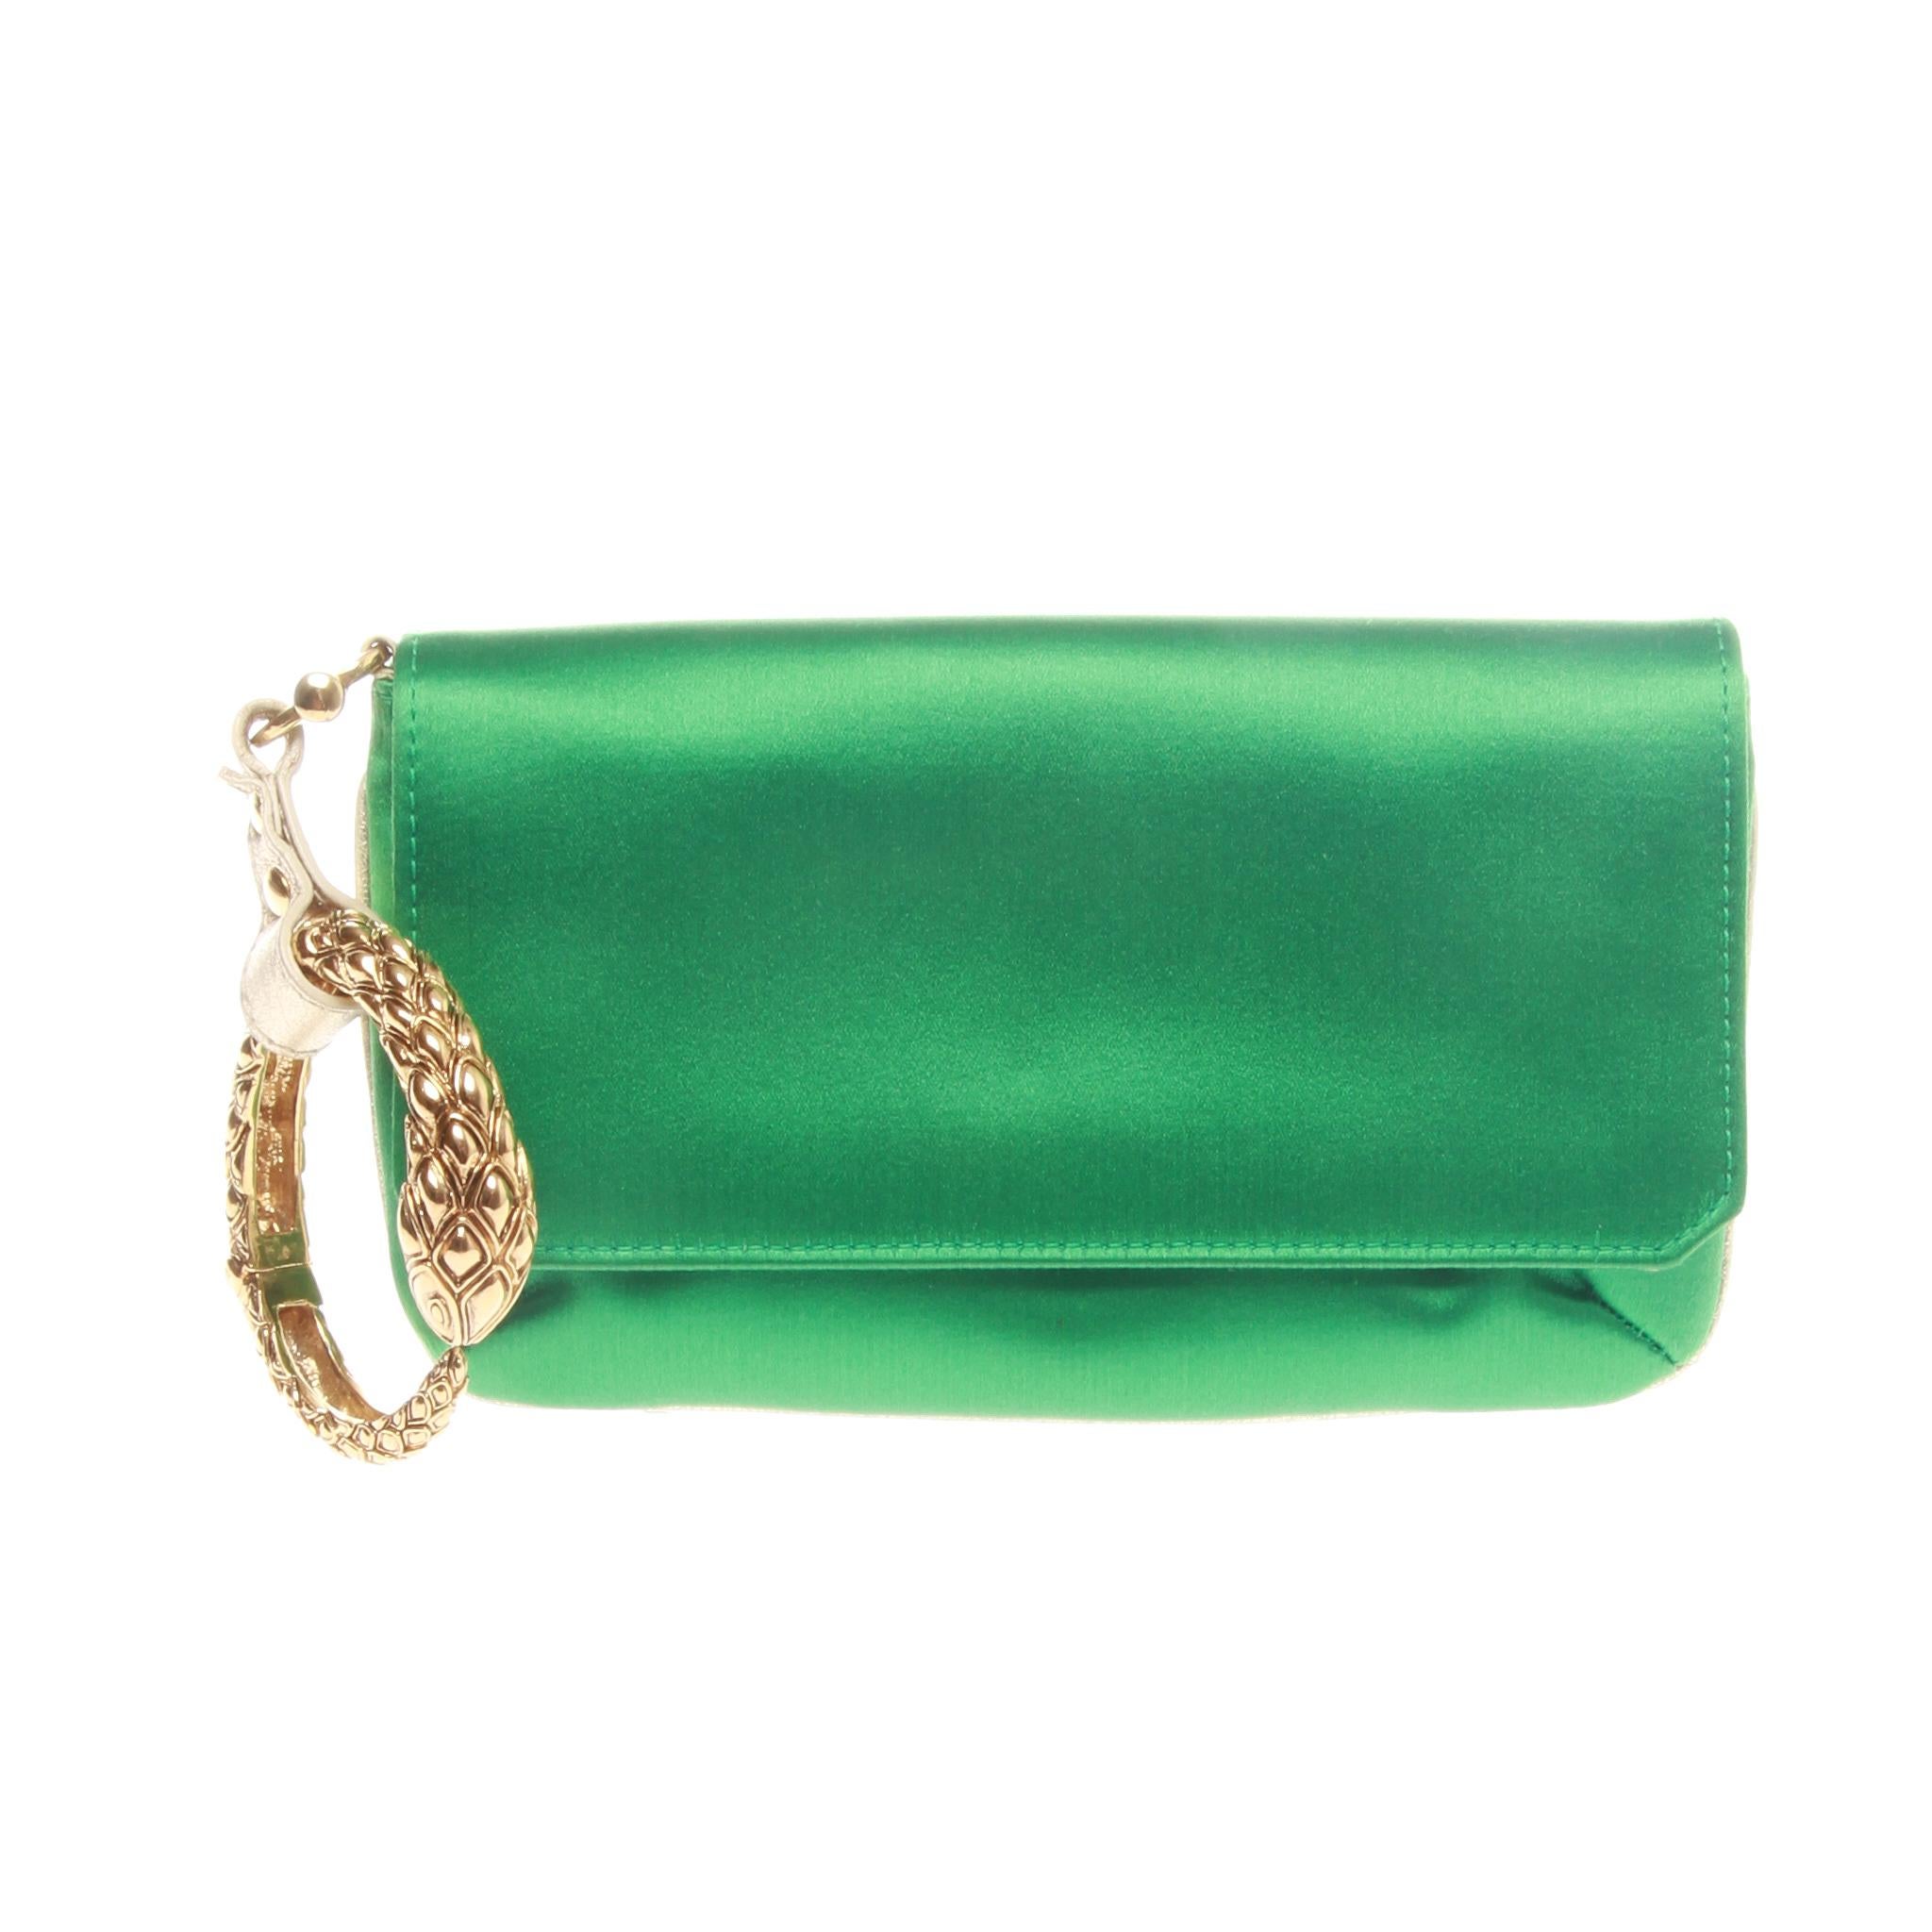 ROBERTO CAVALI SATIN SERPENT BRACELET CLUTCH

This Roberto Cavalli clutch has a fold-over with press stud to fasten, a small zipped pocket on the inside and is fully lined.